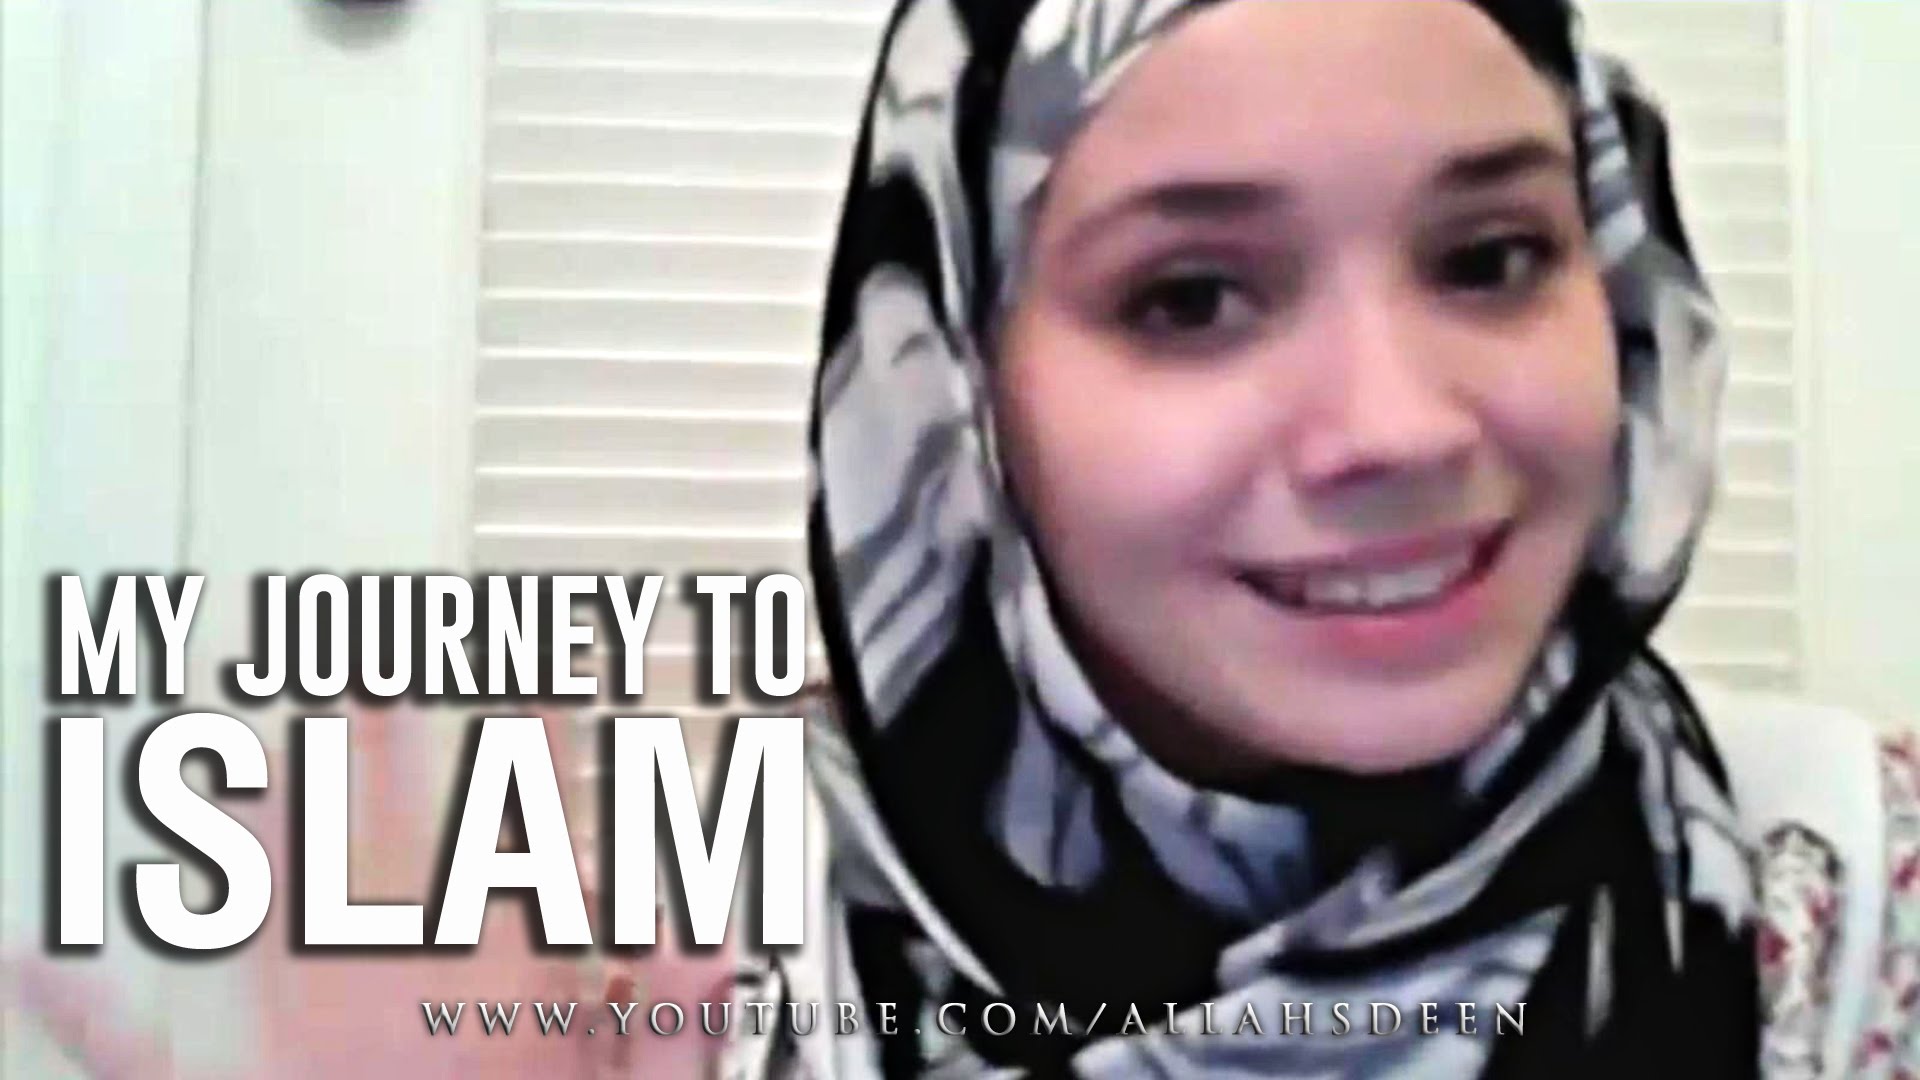 I Showed the Beauty of Islam Through My Actions - About Islam